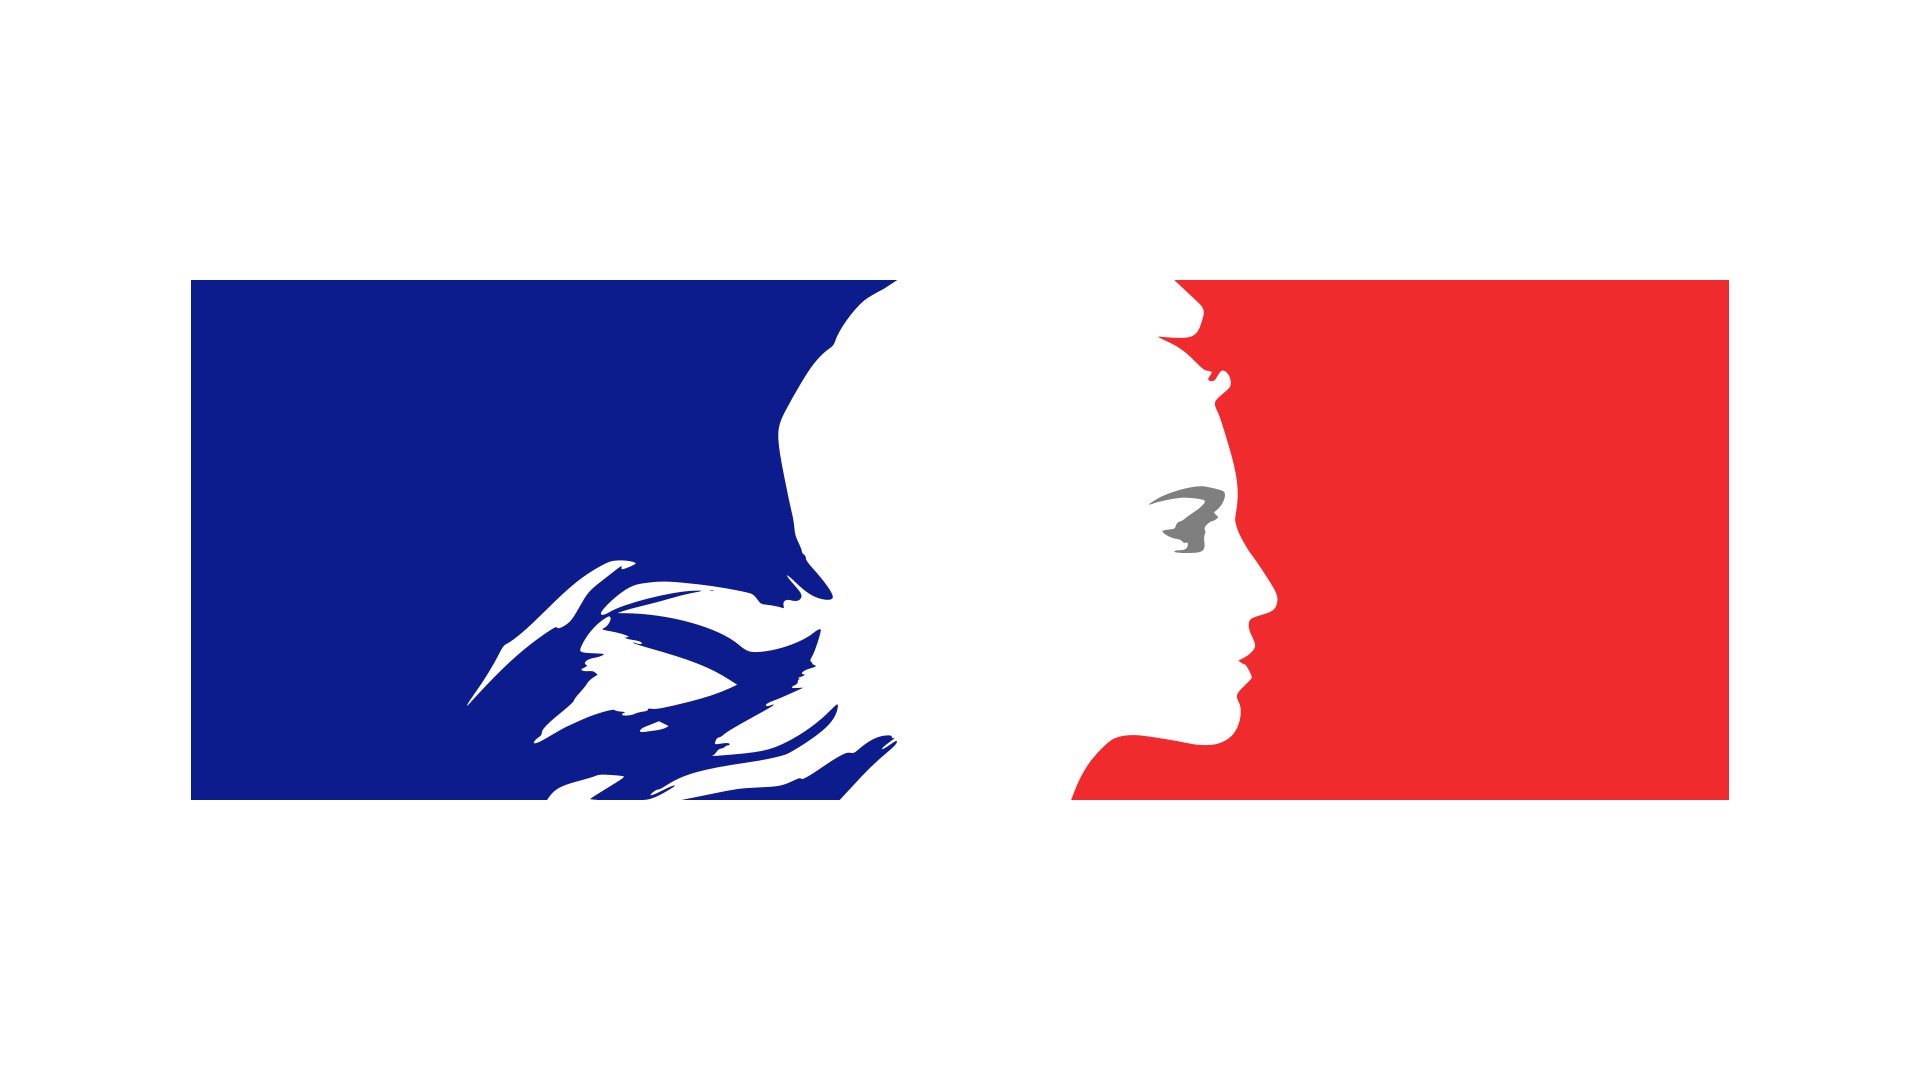 Gouvernement (1 logo Marianne